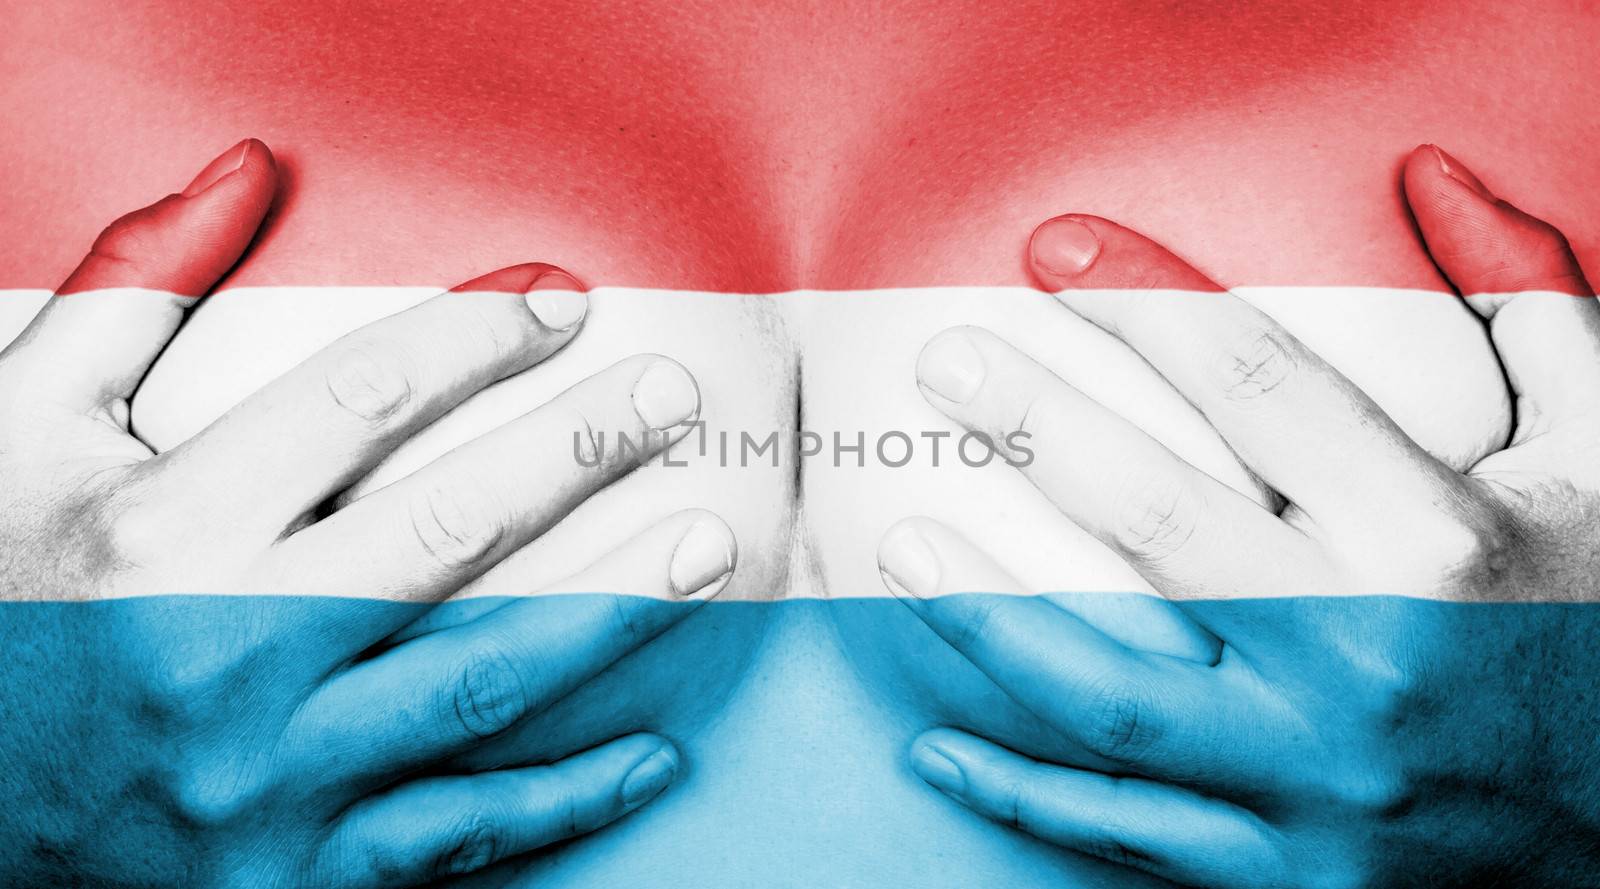 Upper part of female body, hands covering breasts, flag of Luxembourg